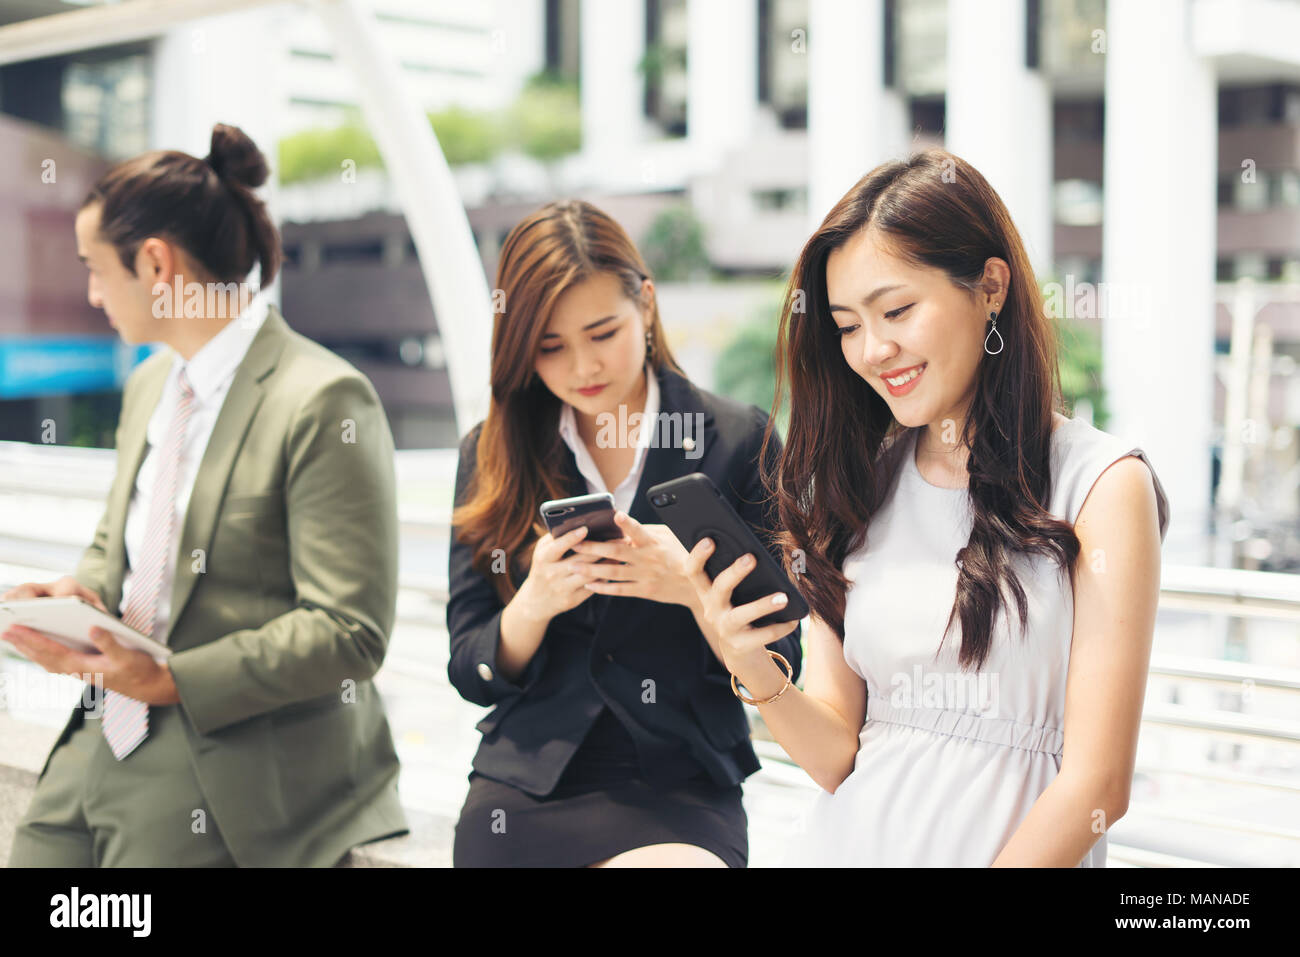 Business people using smartphone while together Stock Photo